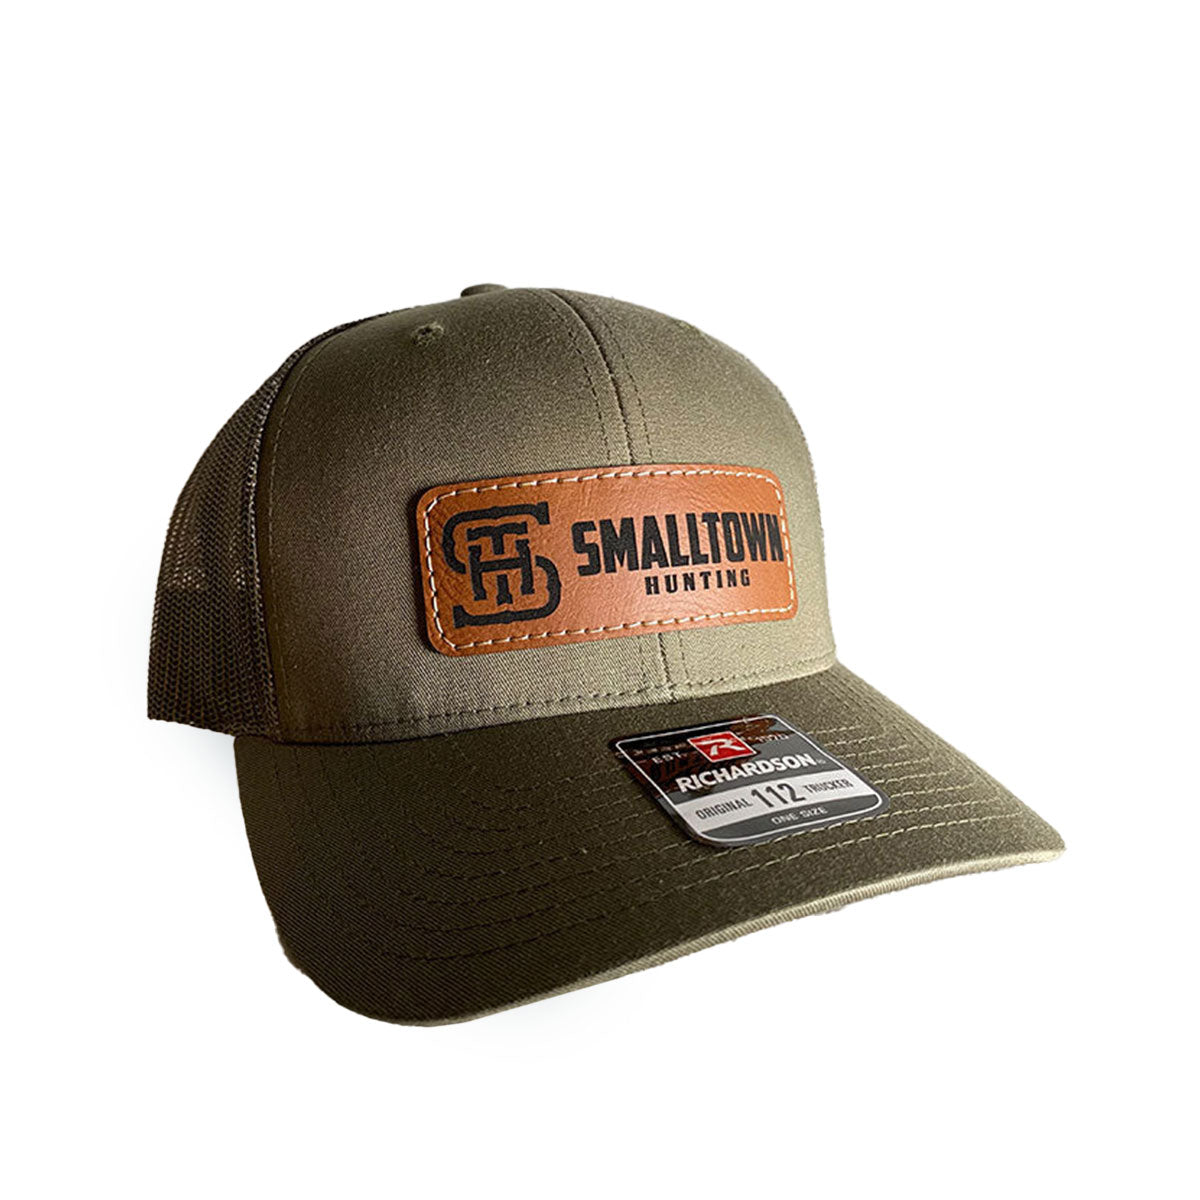 Loden Green Richardson Hat – Small Town Hunting